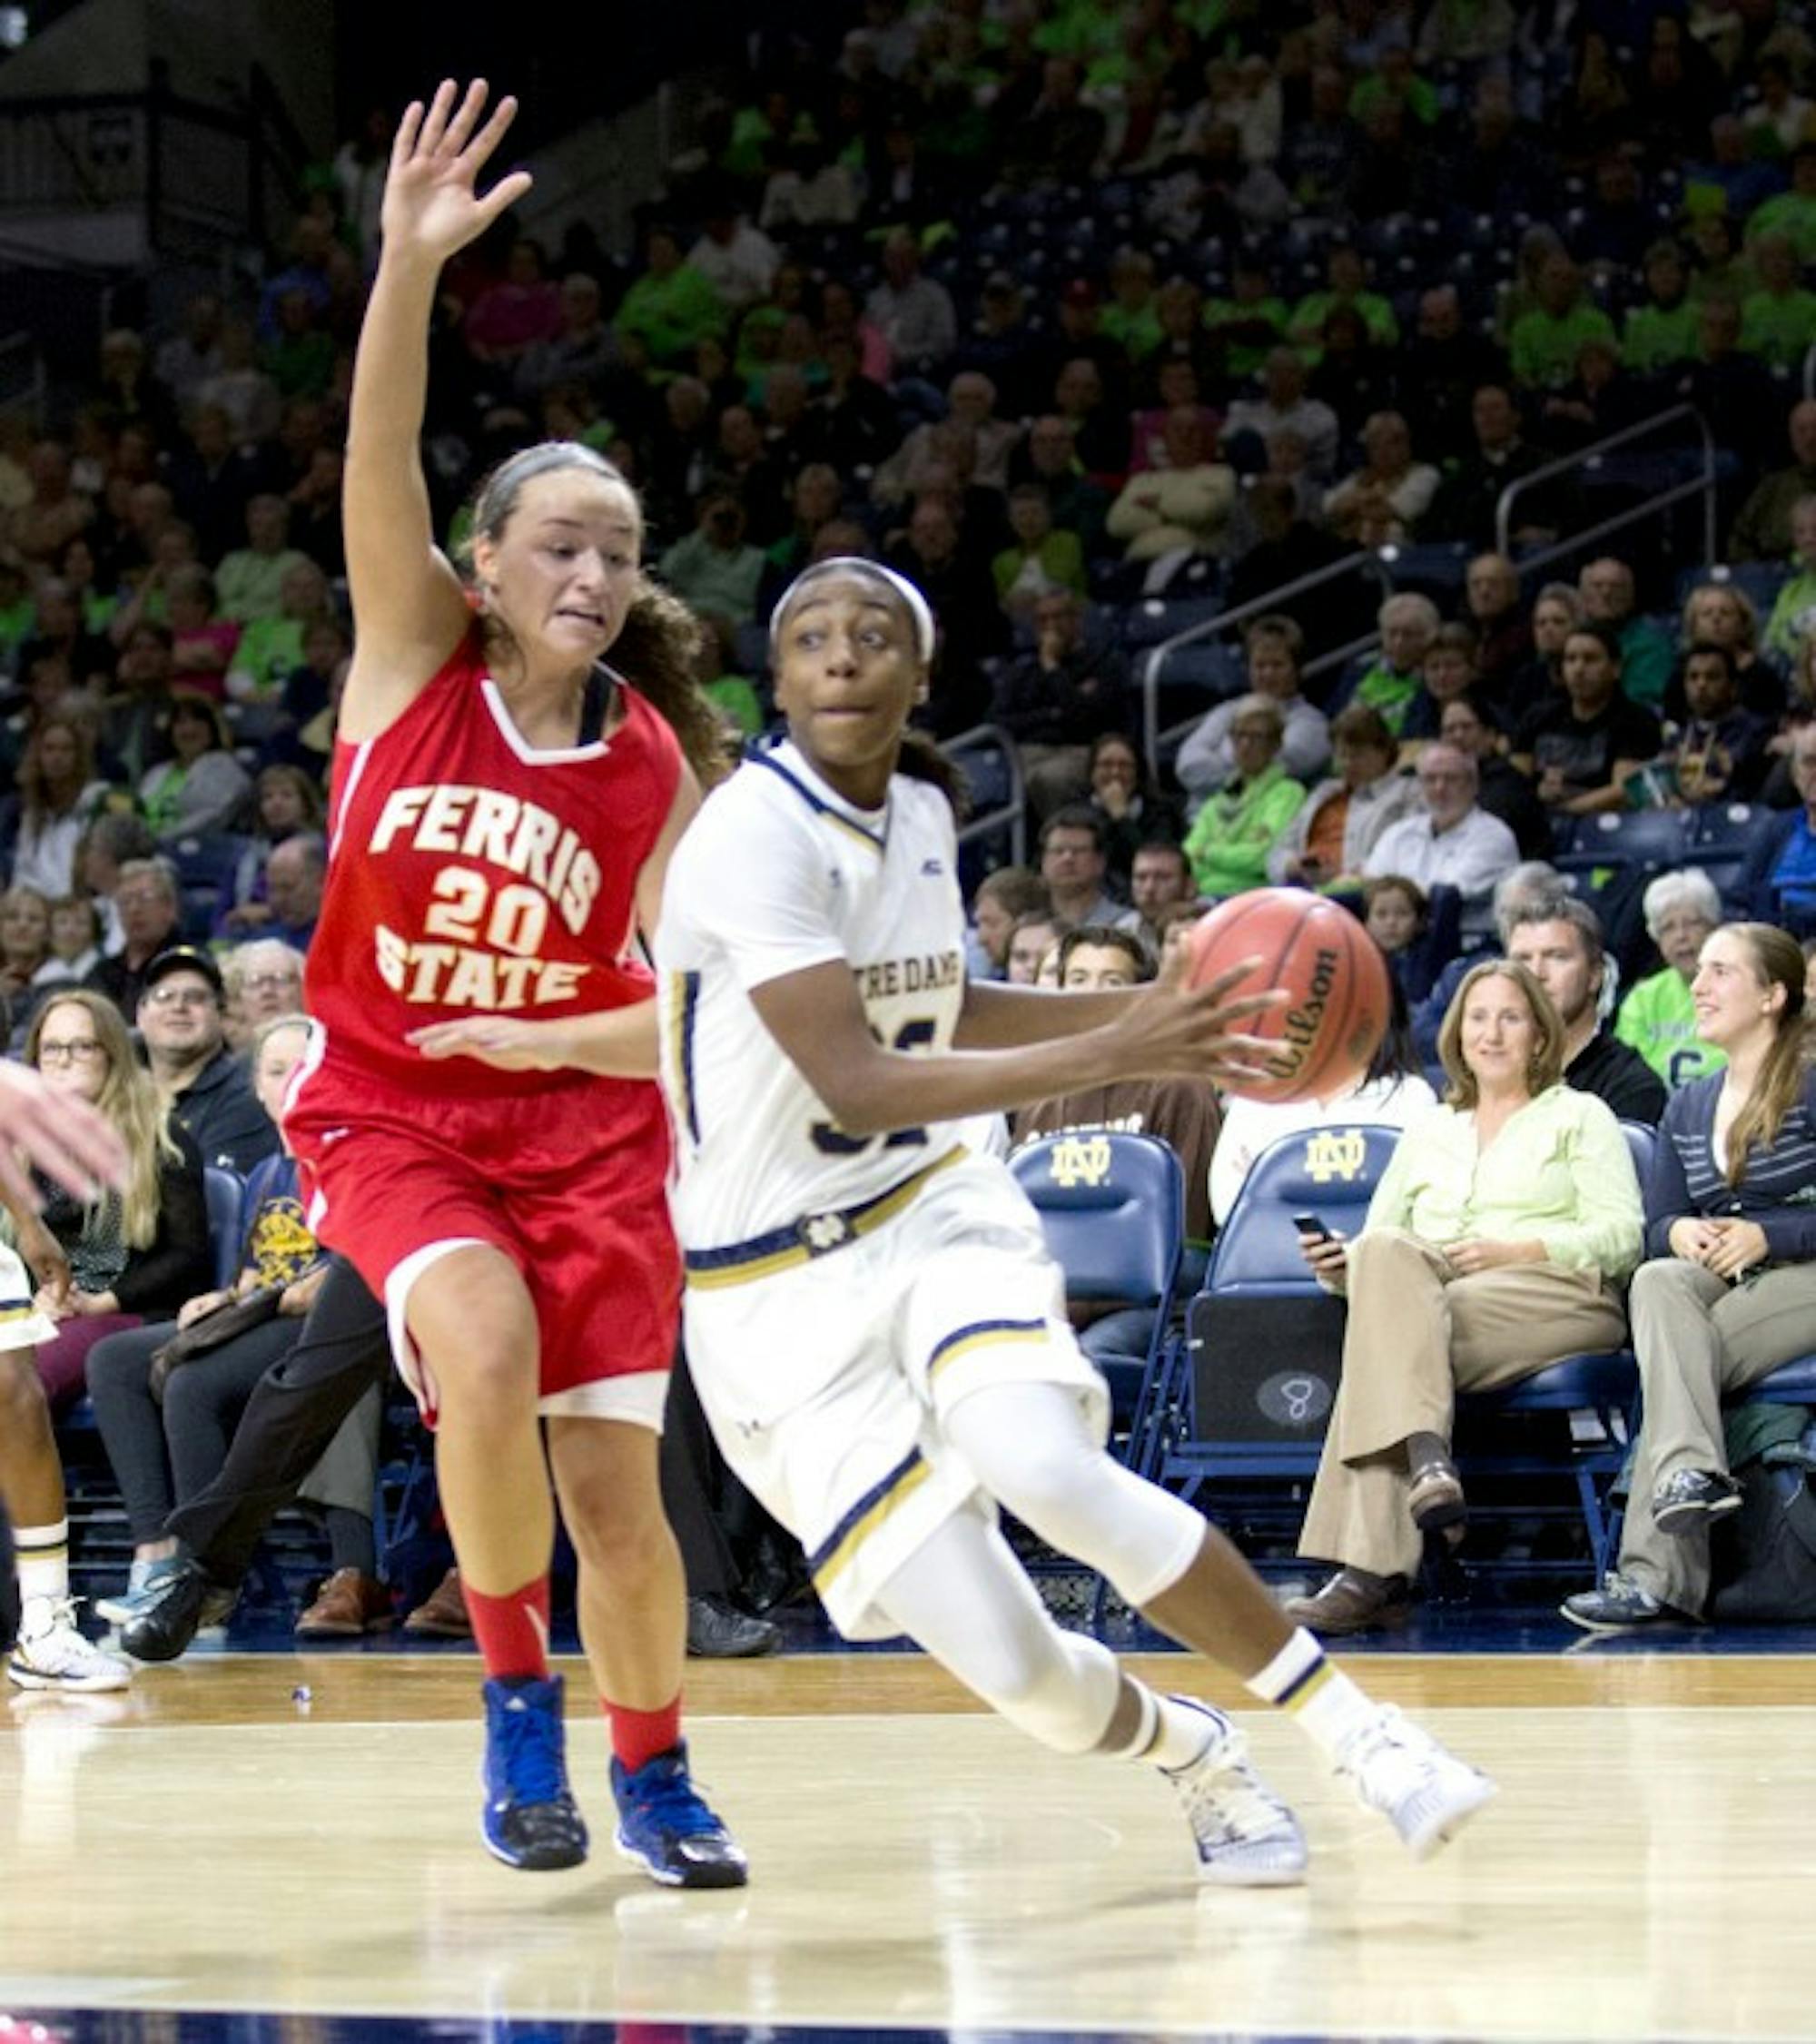 Irish junior guard Jewell Loyd cuts by a Ferris State defender during Notre Dame’s 92-32 rout over the Bulldogs on Wednesday night. The game was Notre Dame’s only exhibition contest of the season.